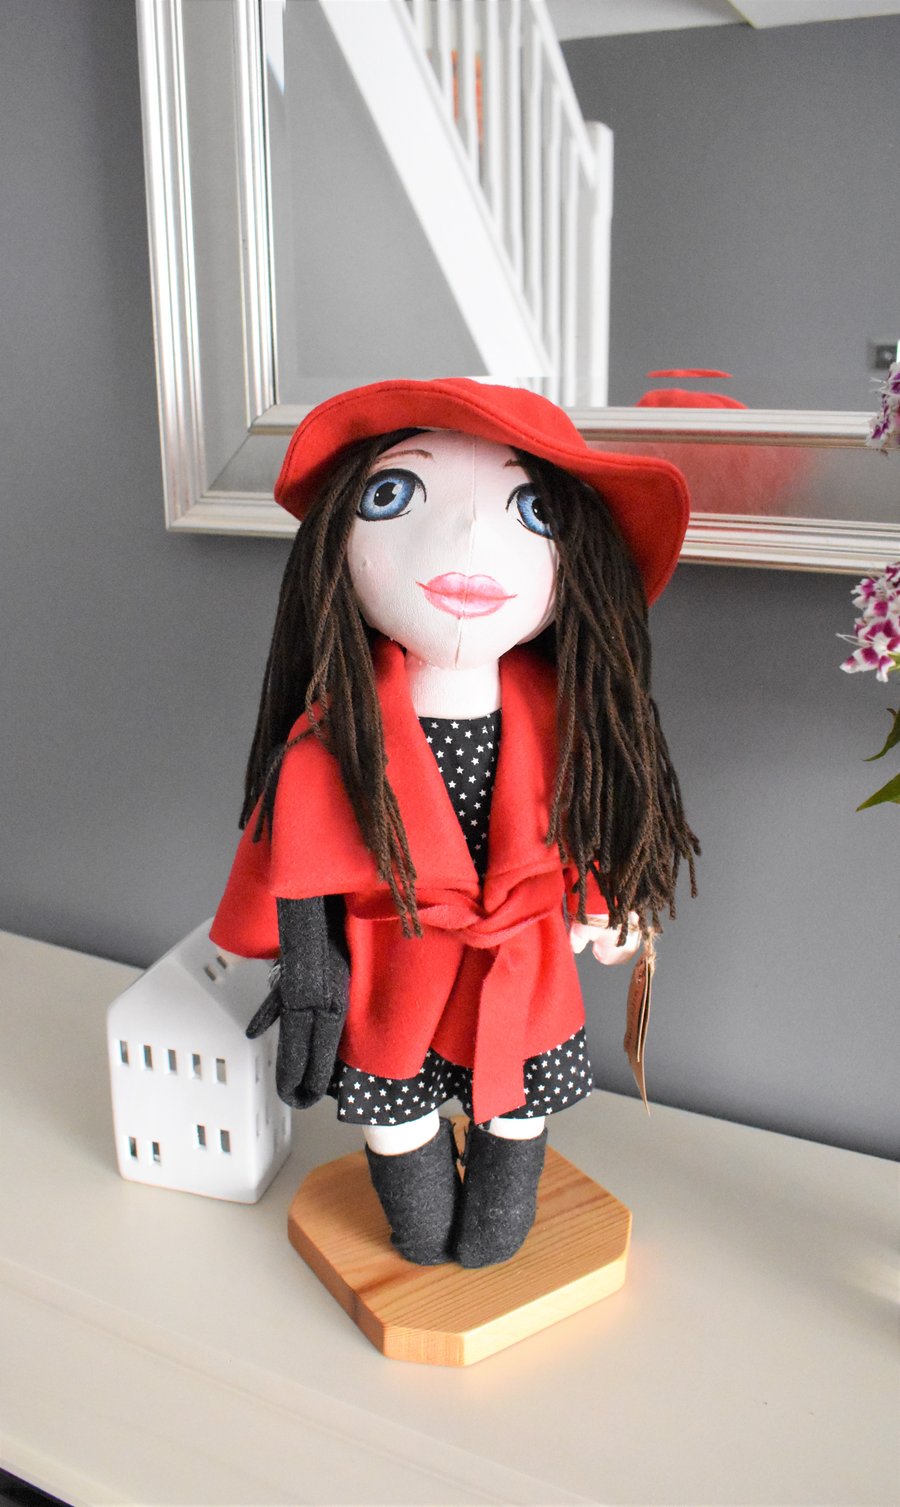 Handmade doll in red